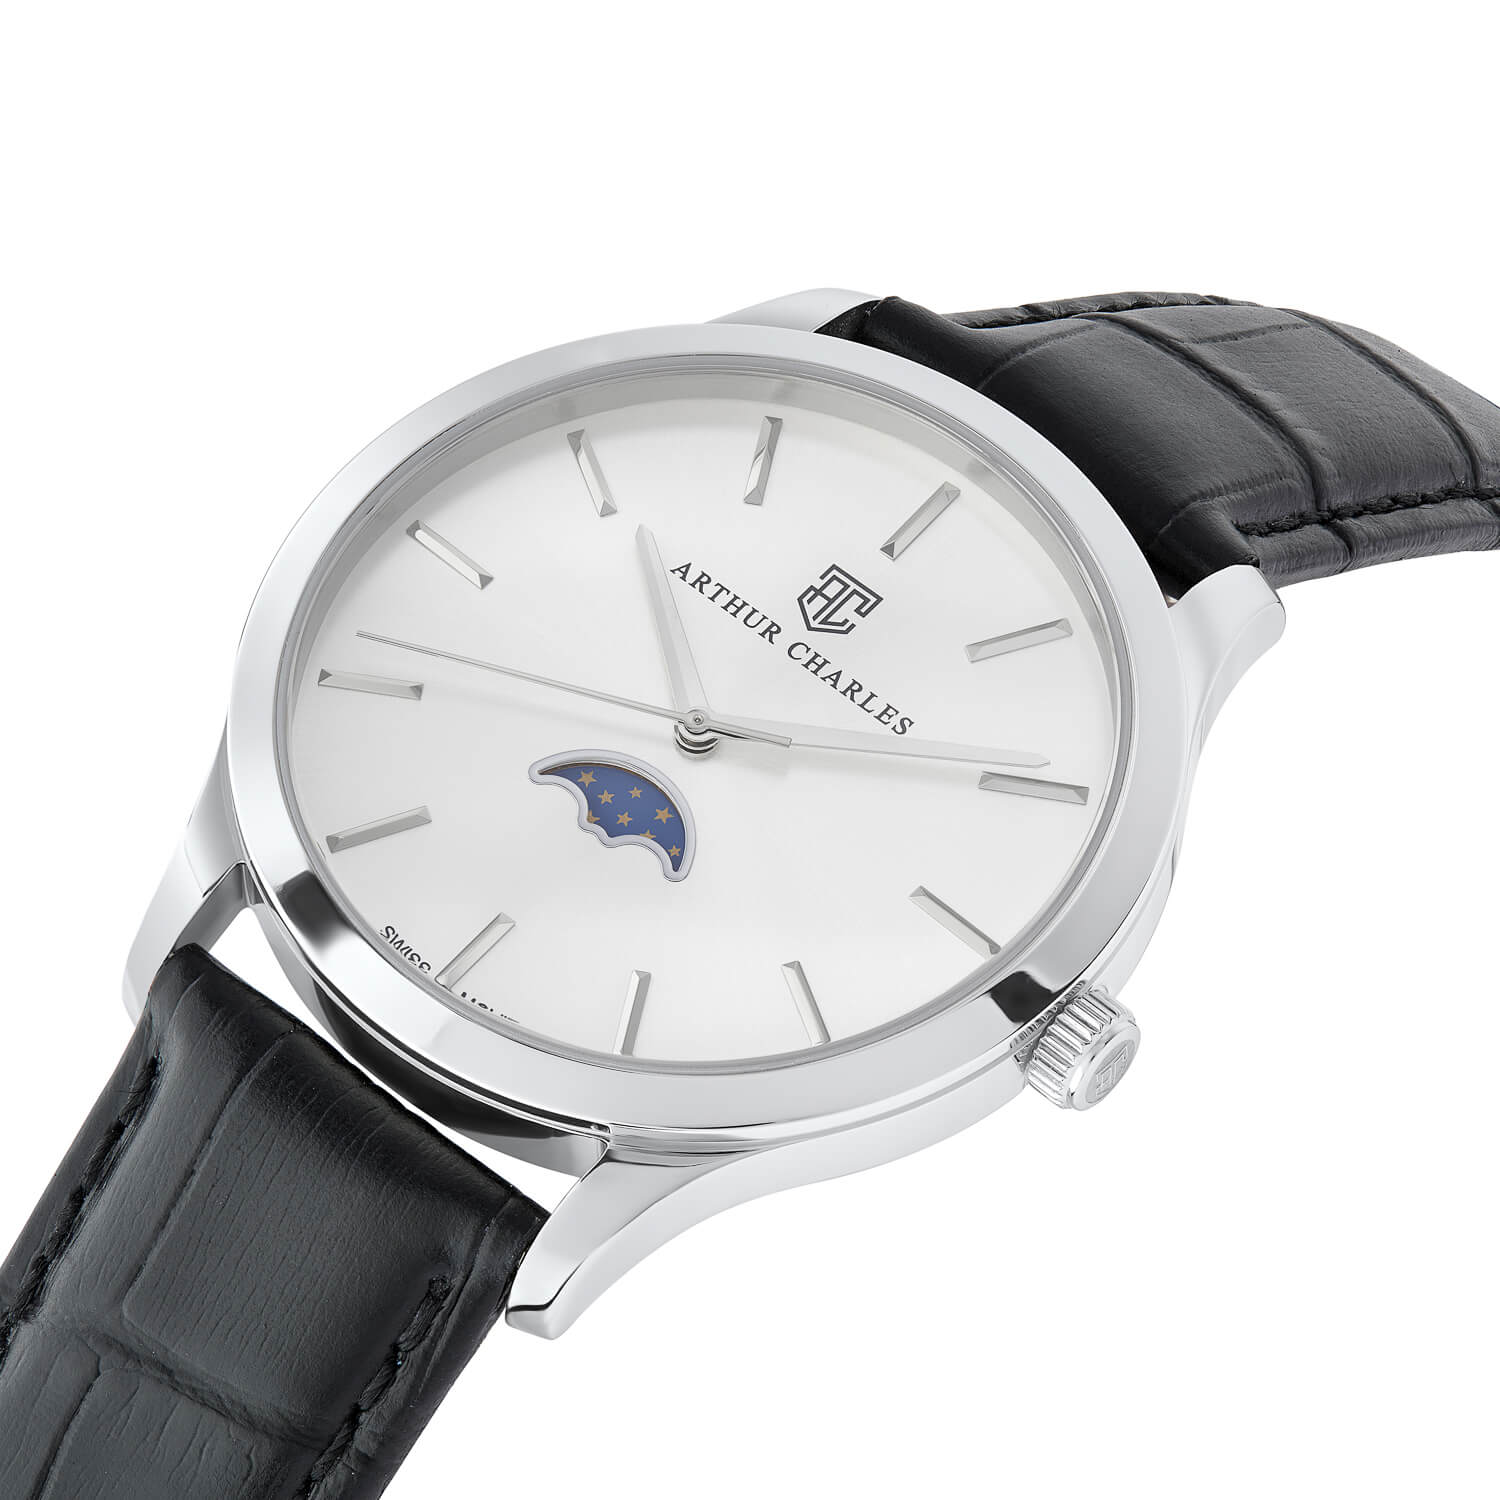 Side view of the Silver Moonphase Watch sold by Arthur Charles Watches. This watch has a black leather butterfly clasp strap and silver dial with silver hands and indices. This watch features a moonphase indicator and also uses swiss movement.